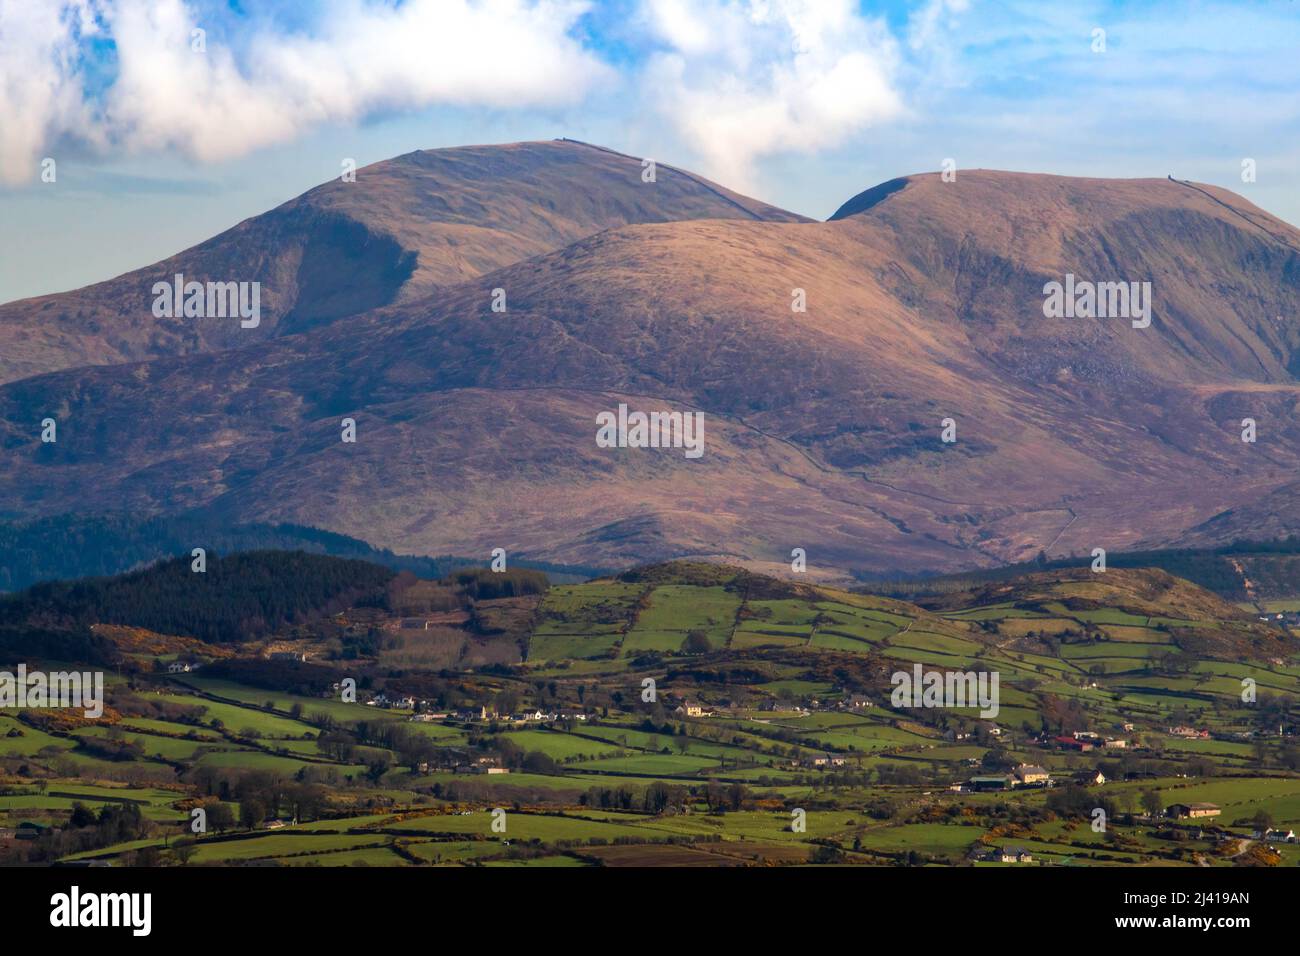 Photo Of The Beautiful Mourne Mountains With Slieve Donard, The Highest Point In Northern Ireland In View.  Taken Form Windy Gap in Banbridge. Stock Photo